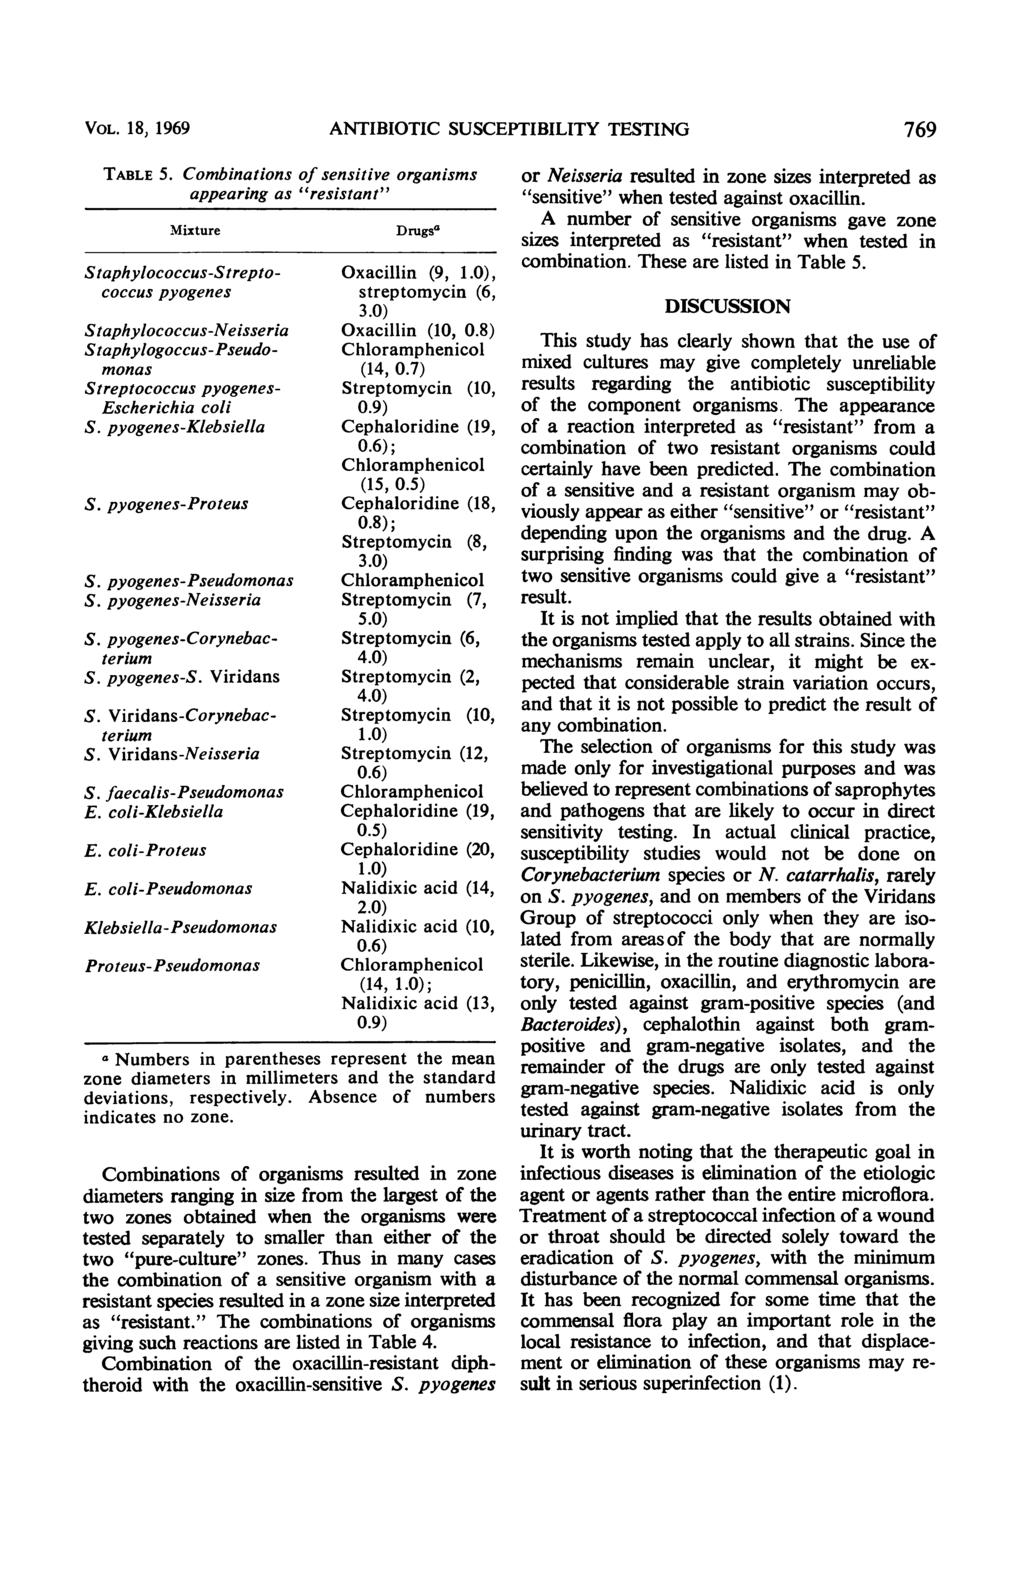 VOL. 18, 1969 ANTIBIOTIC SUSCEPTIBILITY TESTING 769 TABLE 5. Combinations of sensitive organisms appearing as "resistant" Mixture -Streptococcus pyogenes - Staphylogoccus- - - - - - - -S. Viridans S.